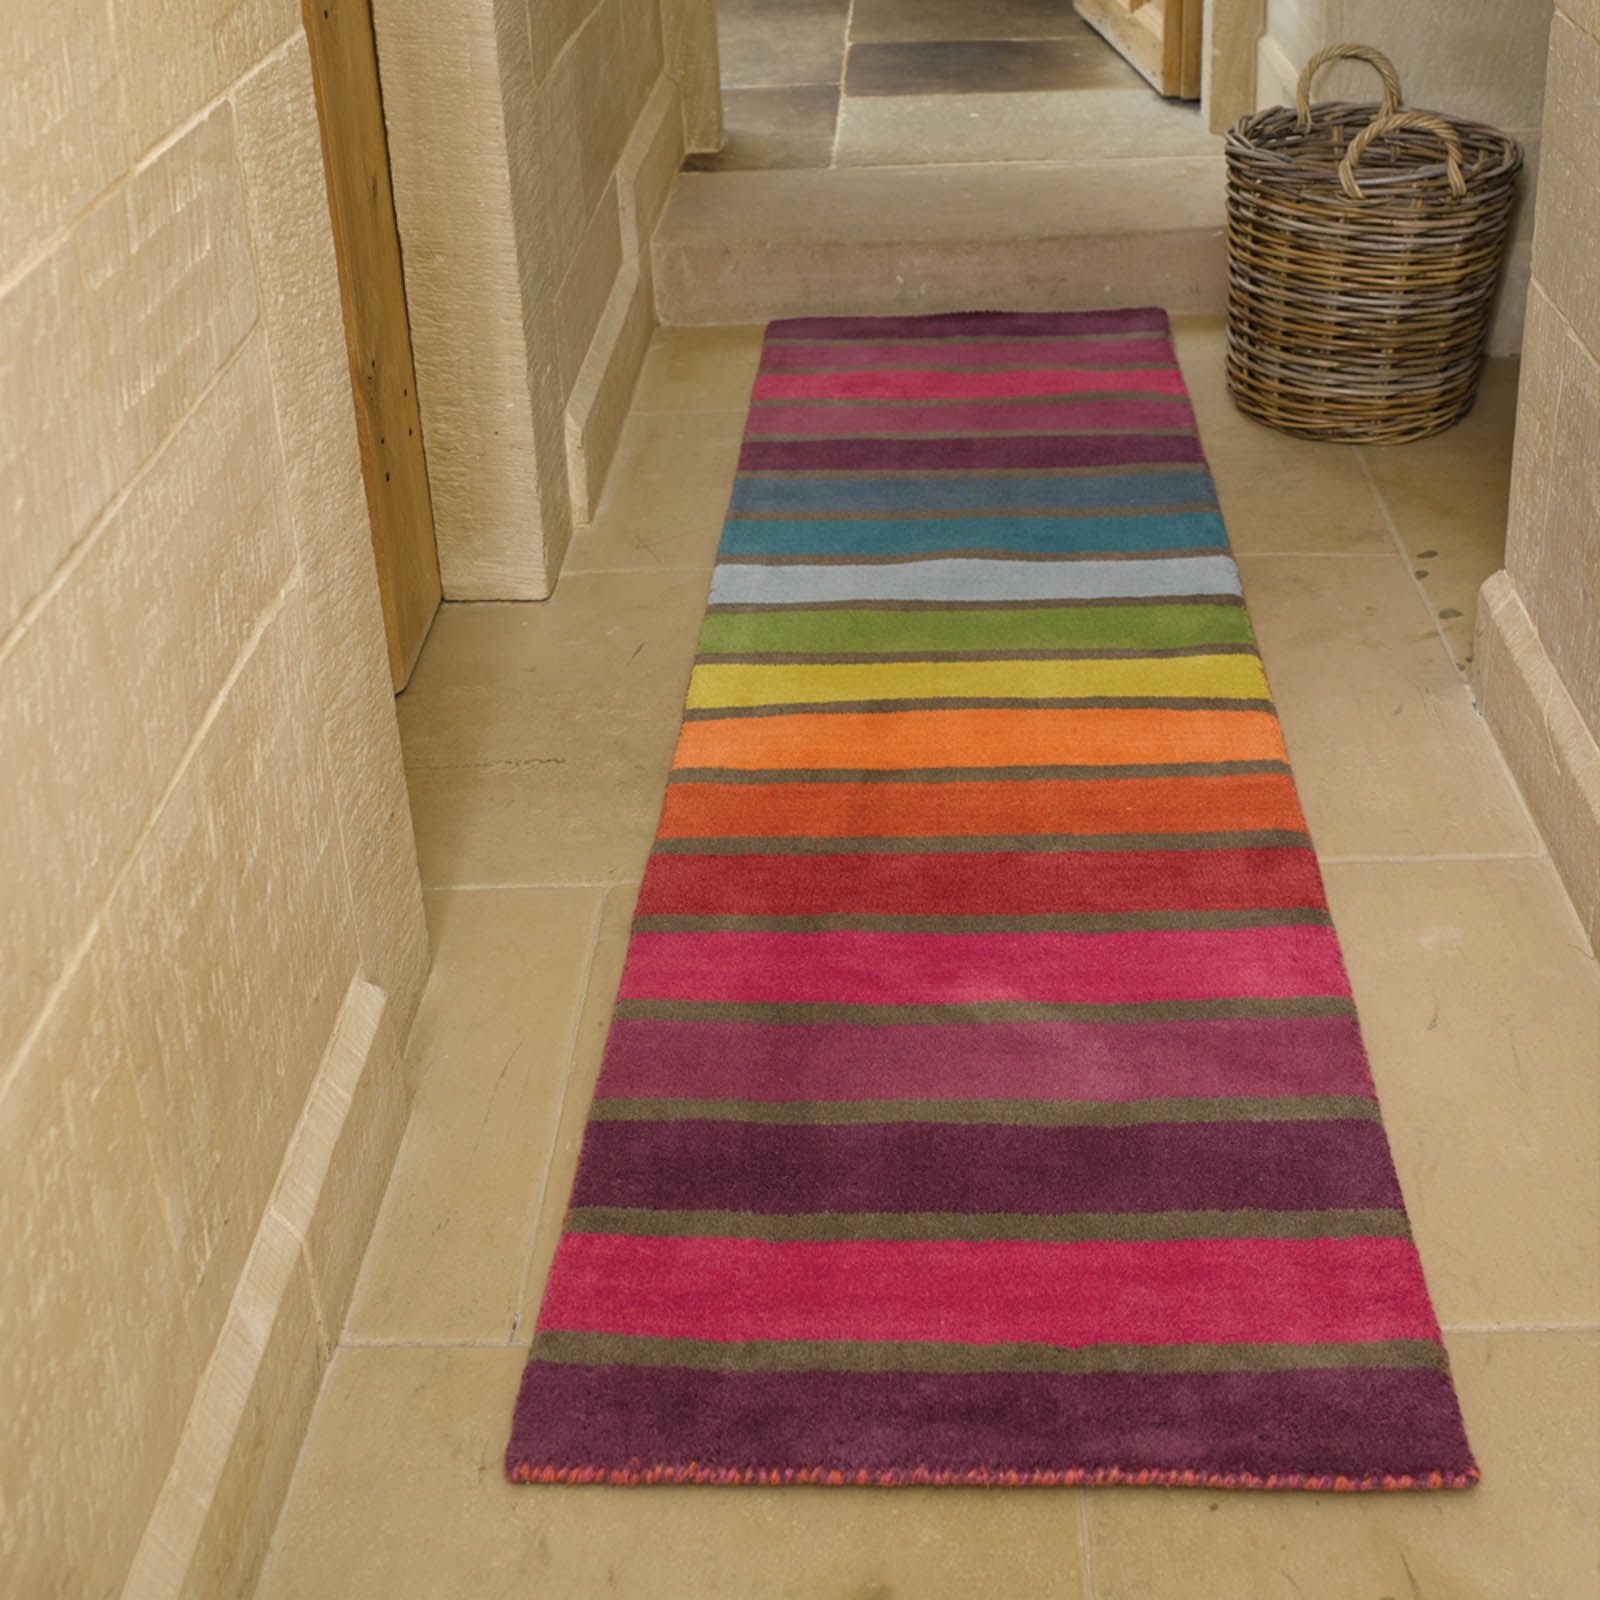 Cheap Runner Rugs Hallway Roselawnlutheran Within Non Slip Hallway Runners (View 3 of 20)